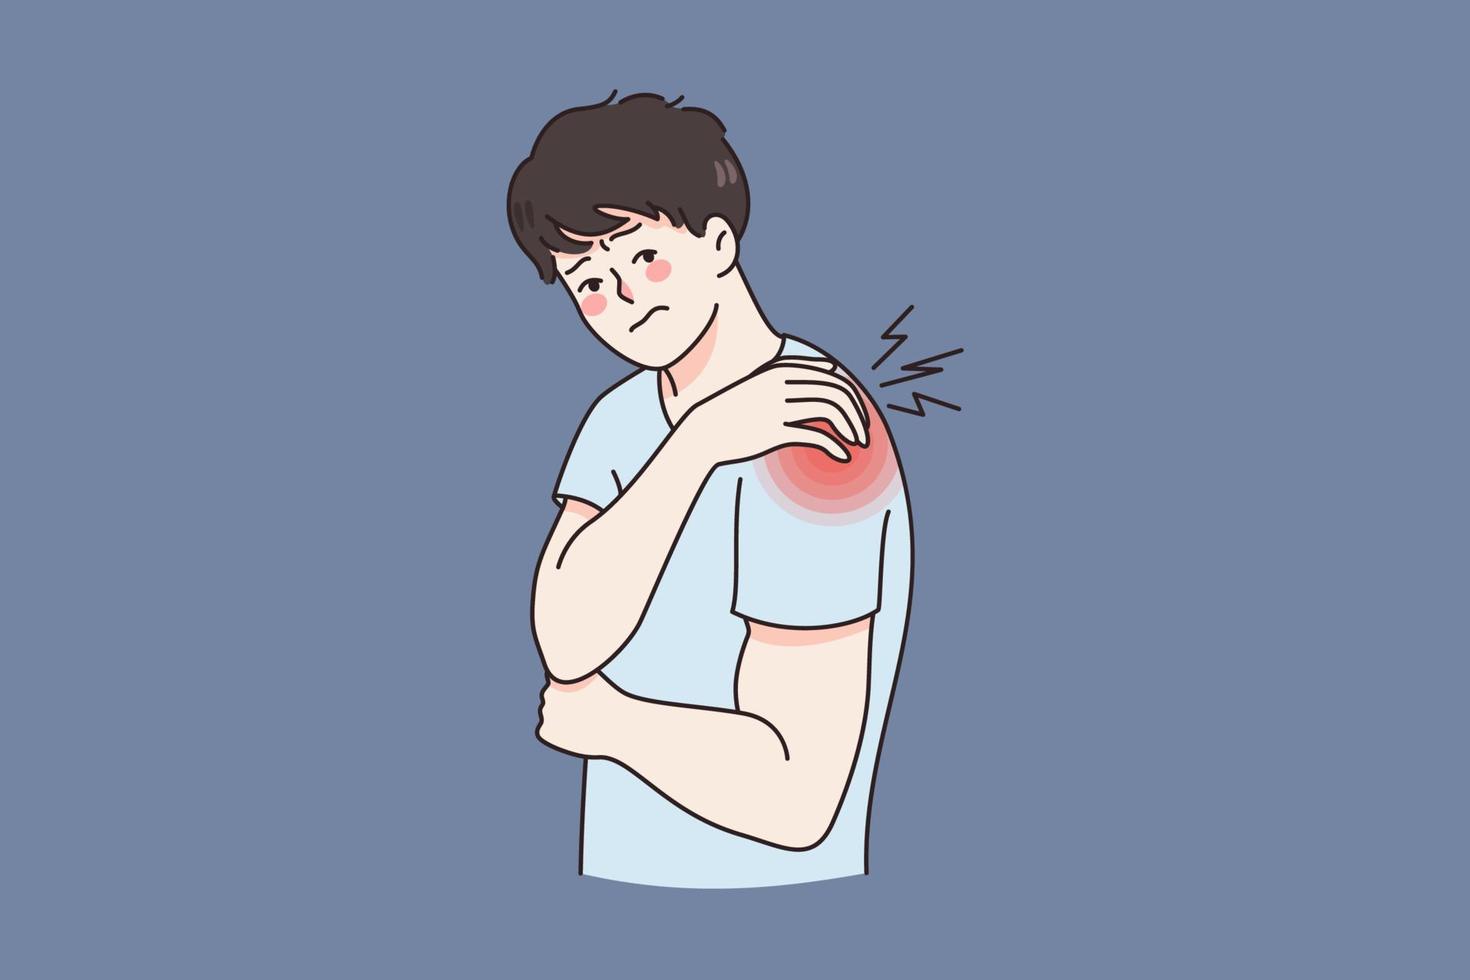 Unhealthy man touch shoulder suffer from back injury or trauma. Unwell sick guy struggle with acute pain or muscular spasm strain in arm. Healthcare and medicine. Flat vector illustration.